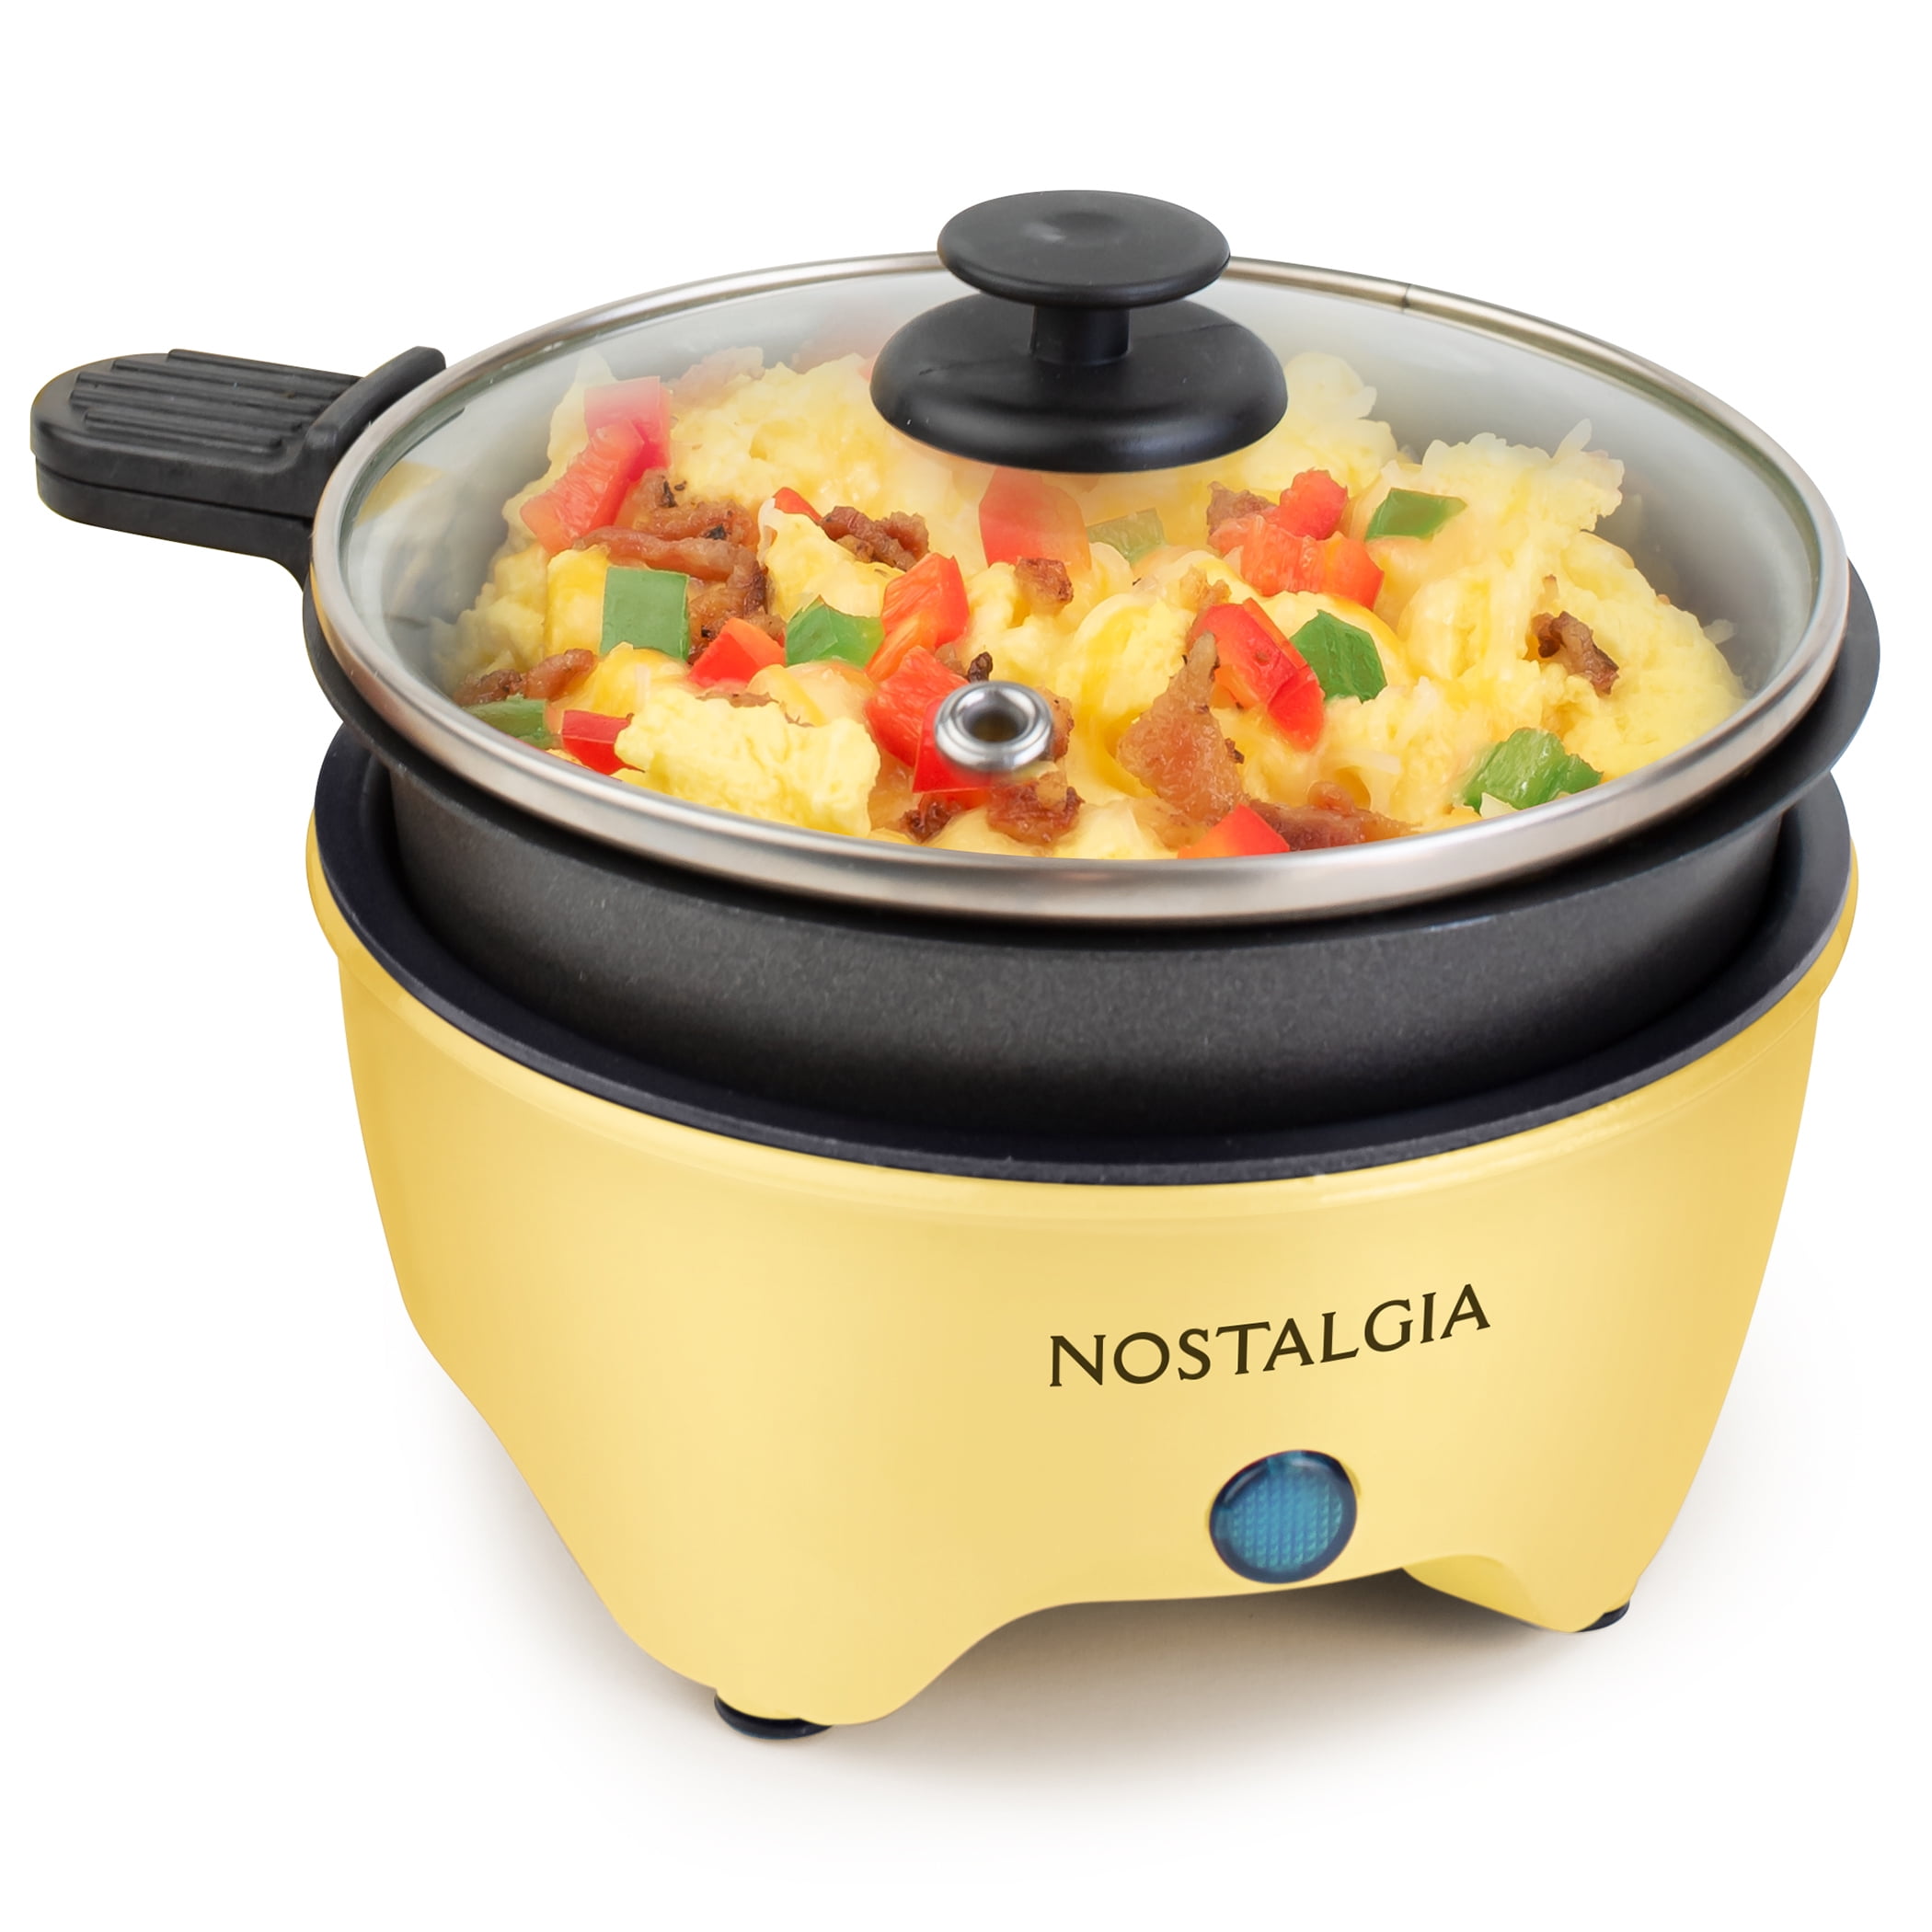 Testing my mini noodle cooker & skillet at work today. It's definitely